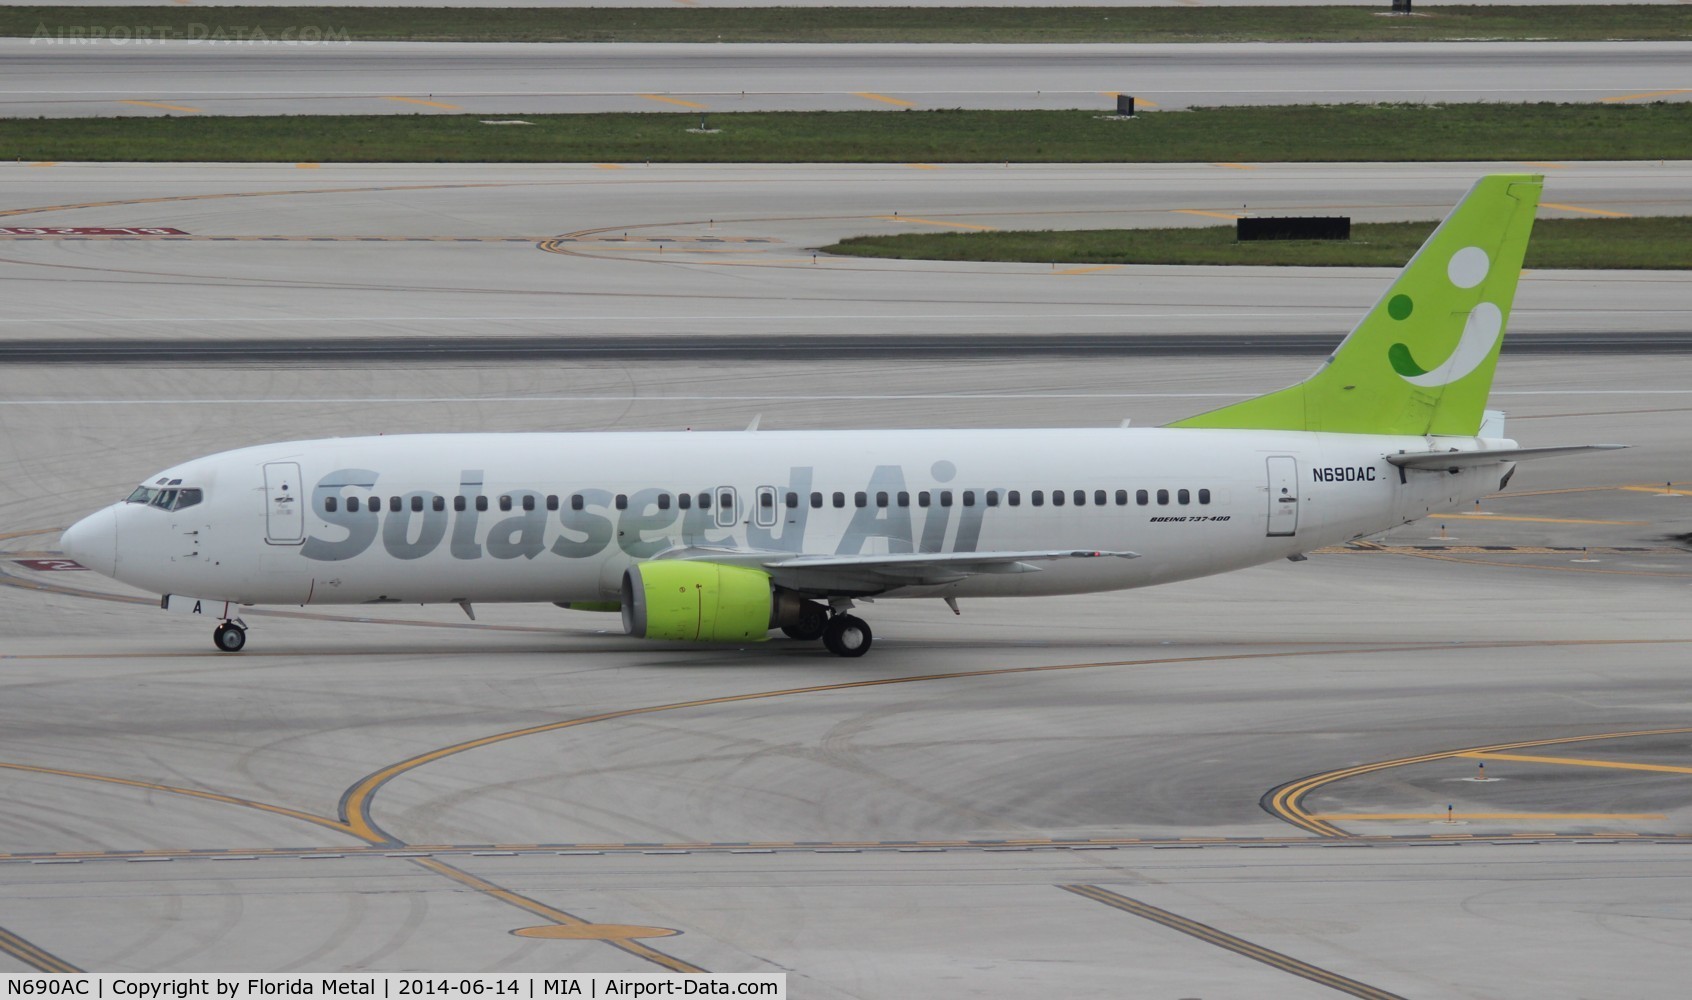 N690AC, 1998 Boeing 737-46Q C/N 29000, Aviation Capital Group 737-400 still in the colors of its former owner Solaseed Air of Japan